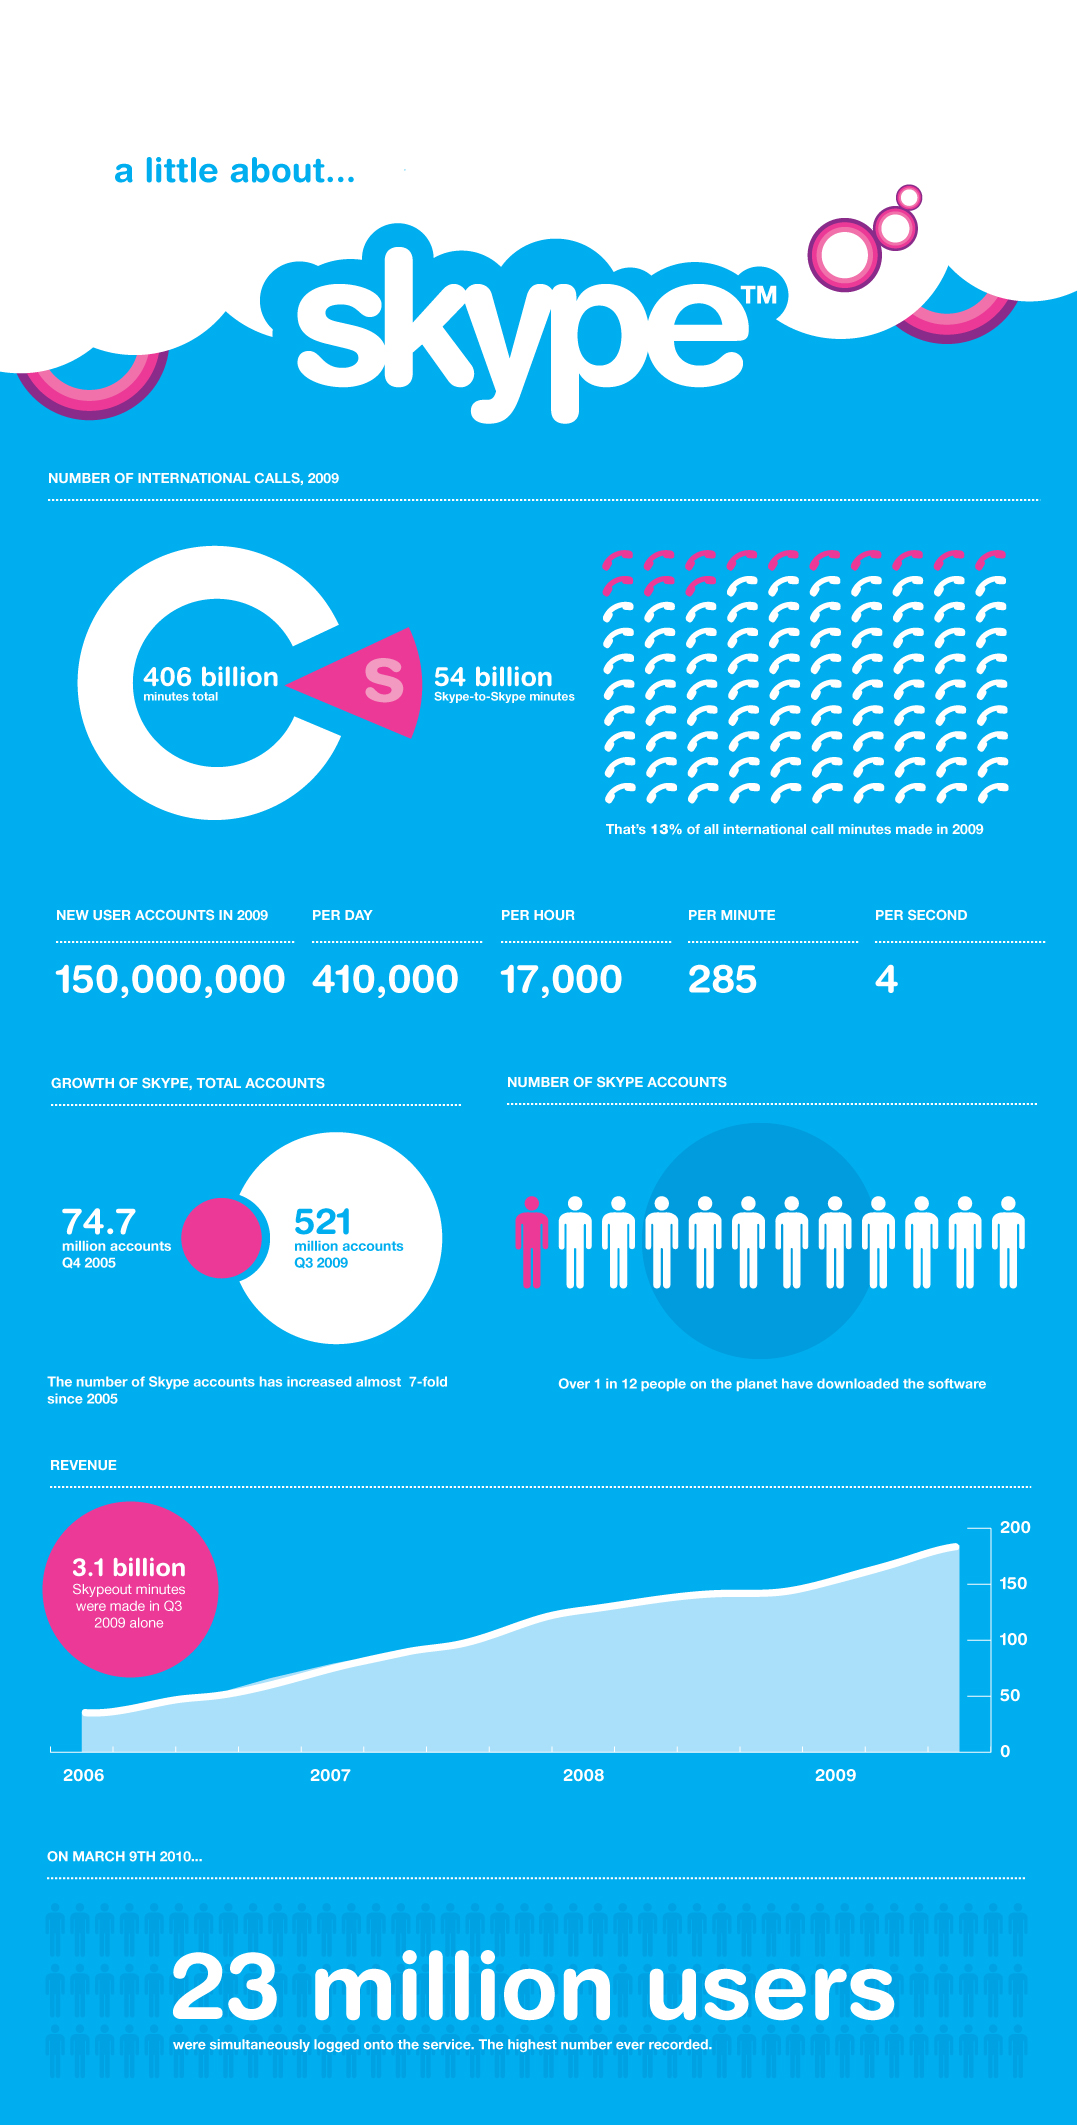 Skype by the Numbers Info Graphic |  GDS Infographics  -  Foter  -  (CC BY 2.0)